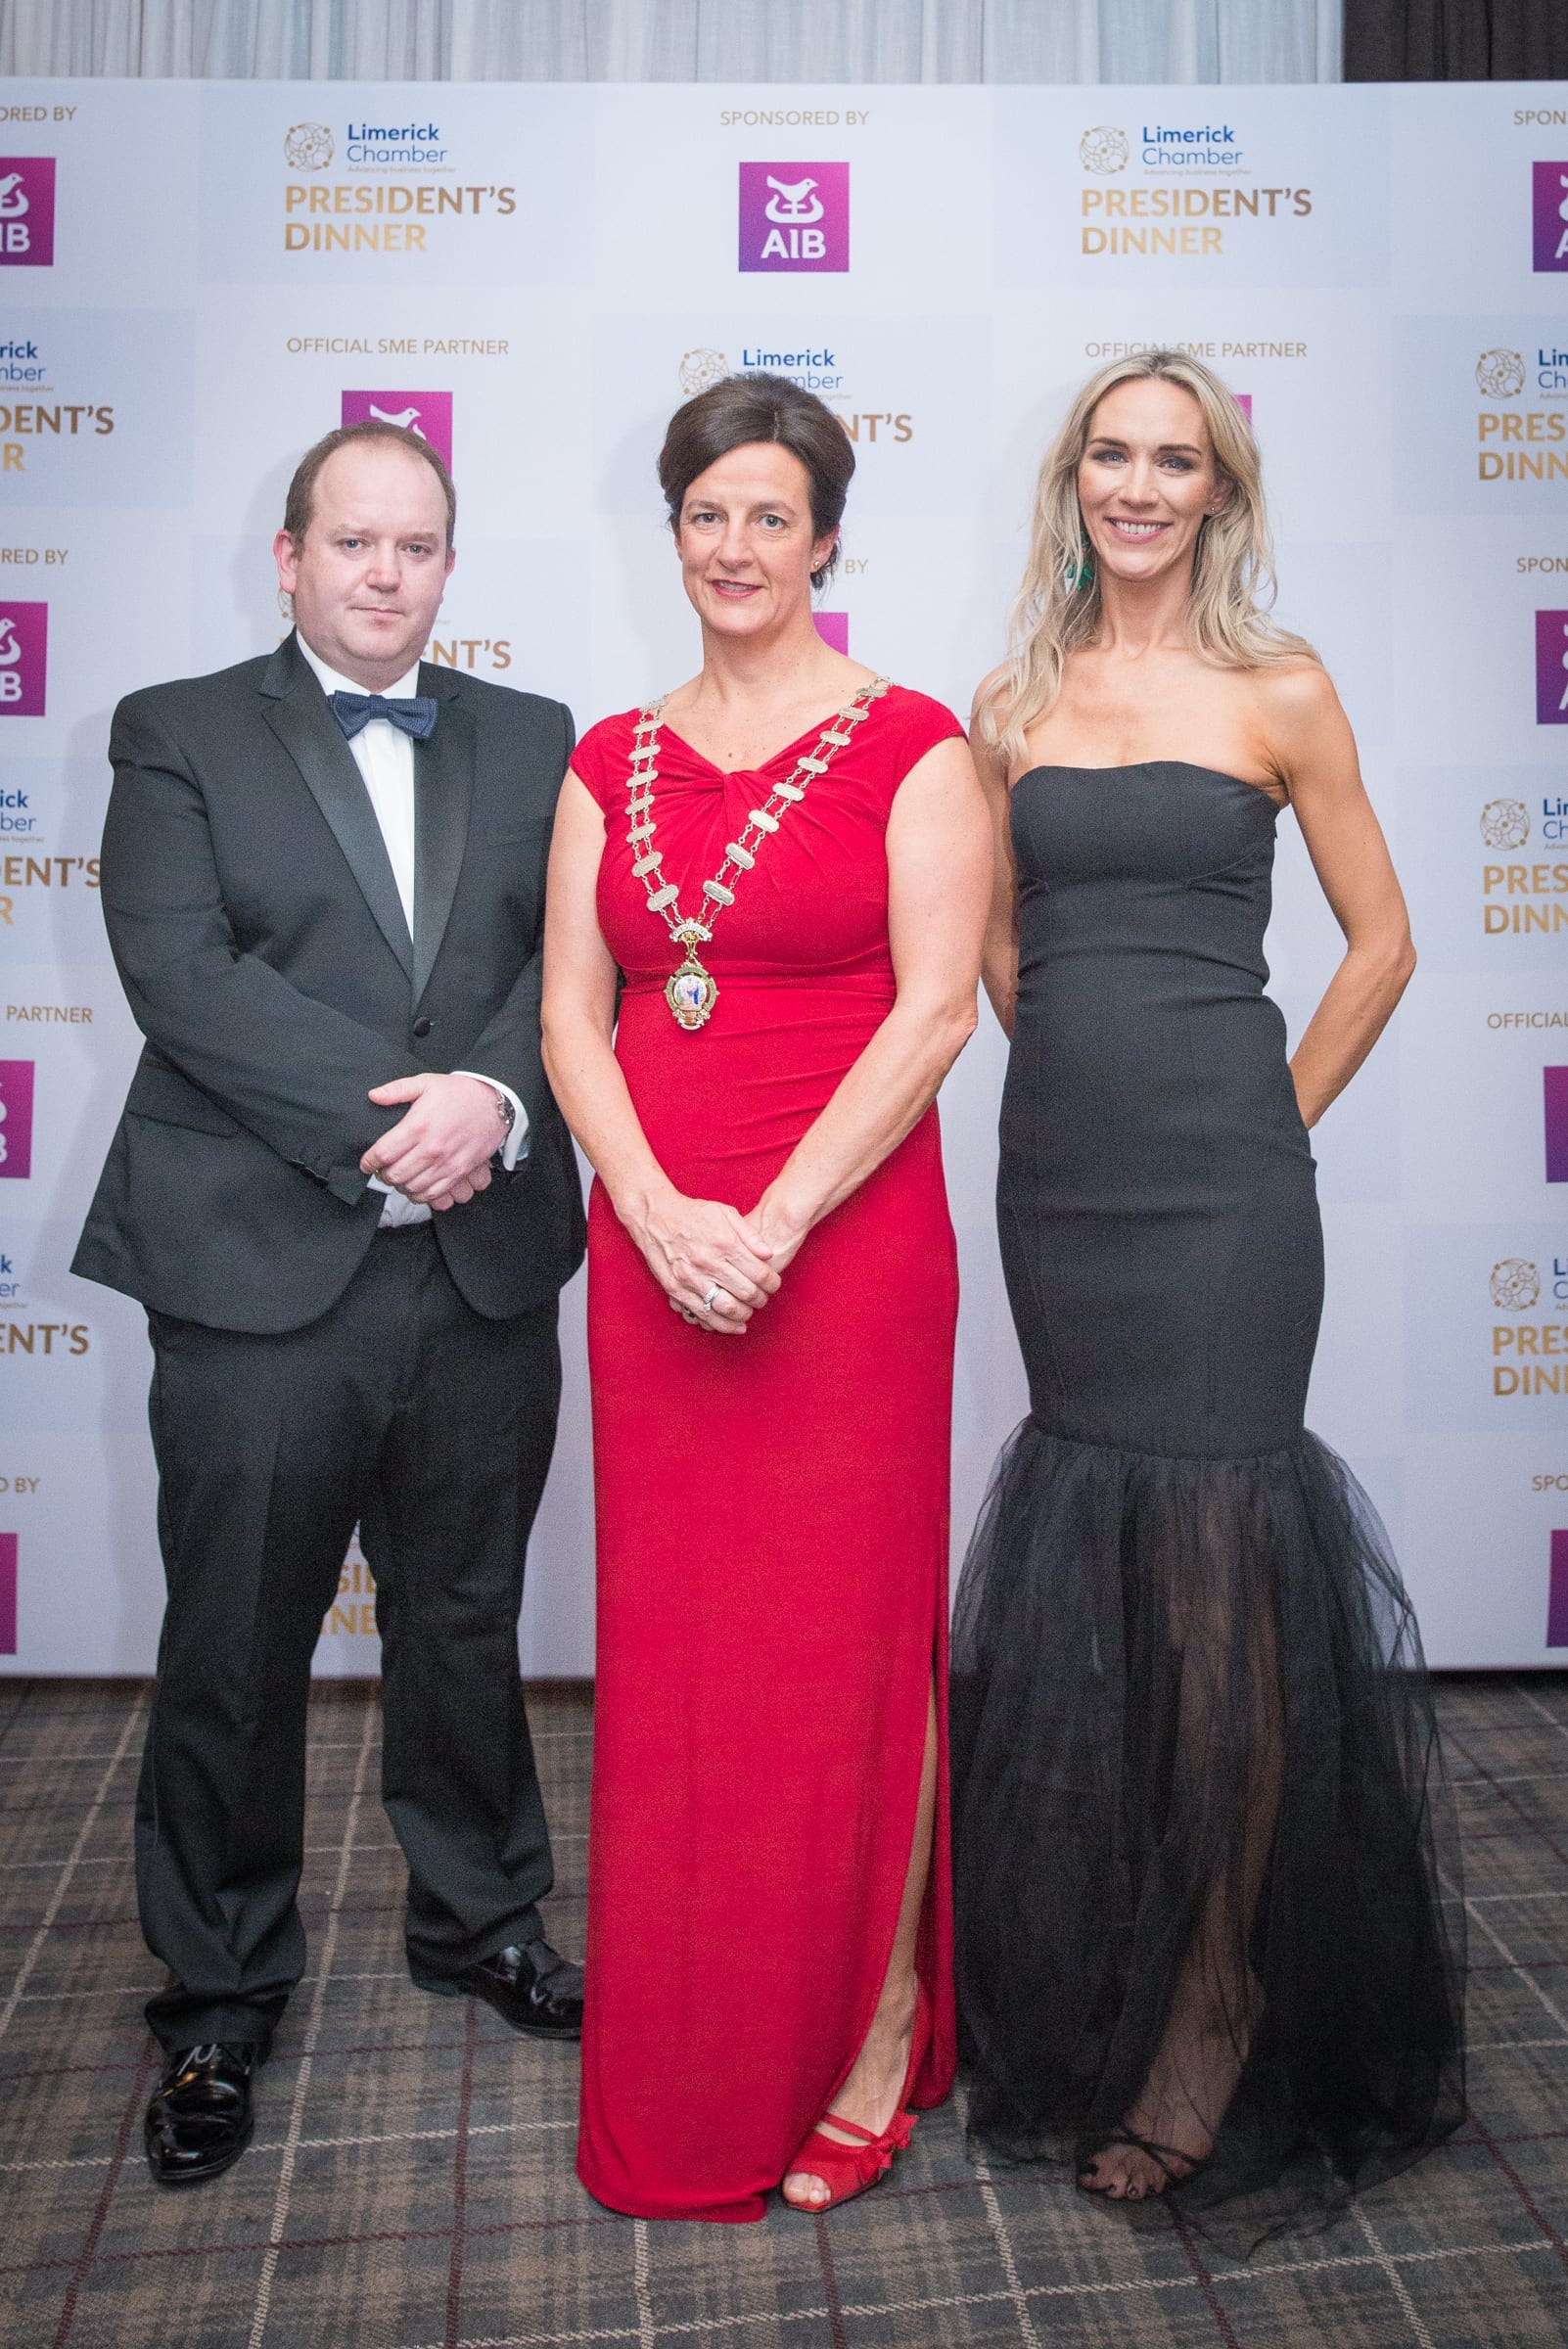 No repro fee- limerick chamber president's dinner- 16-11-2018, From Left to Right: Conor O'Sullivan - AIB/ Sponsor, Dr Mary Shire - President Limerick Chamber, Deirdre Ryan - CEO Limerick Chamber, Photo credit Shauna Kennedy